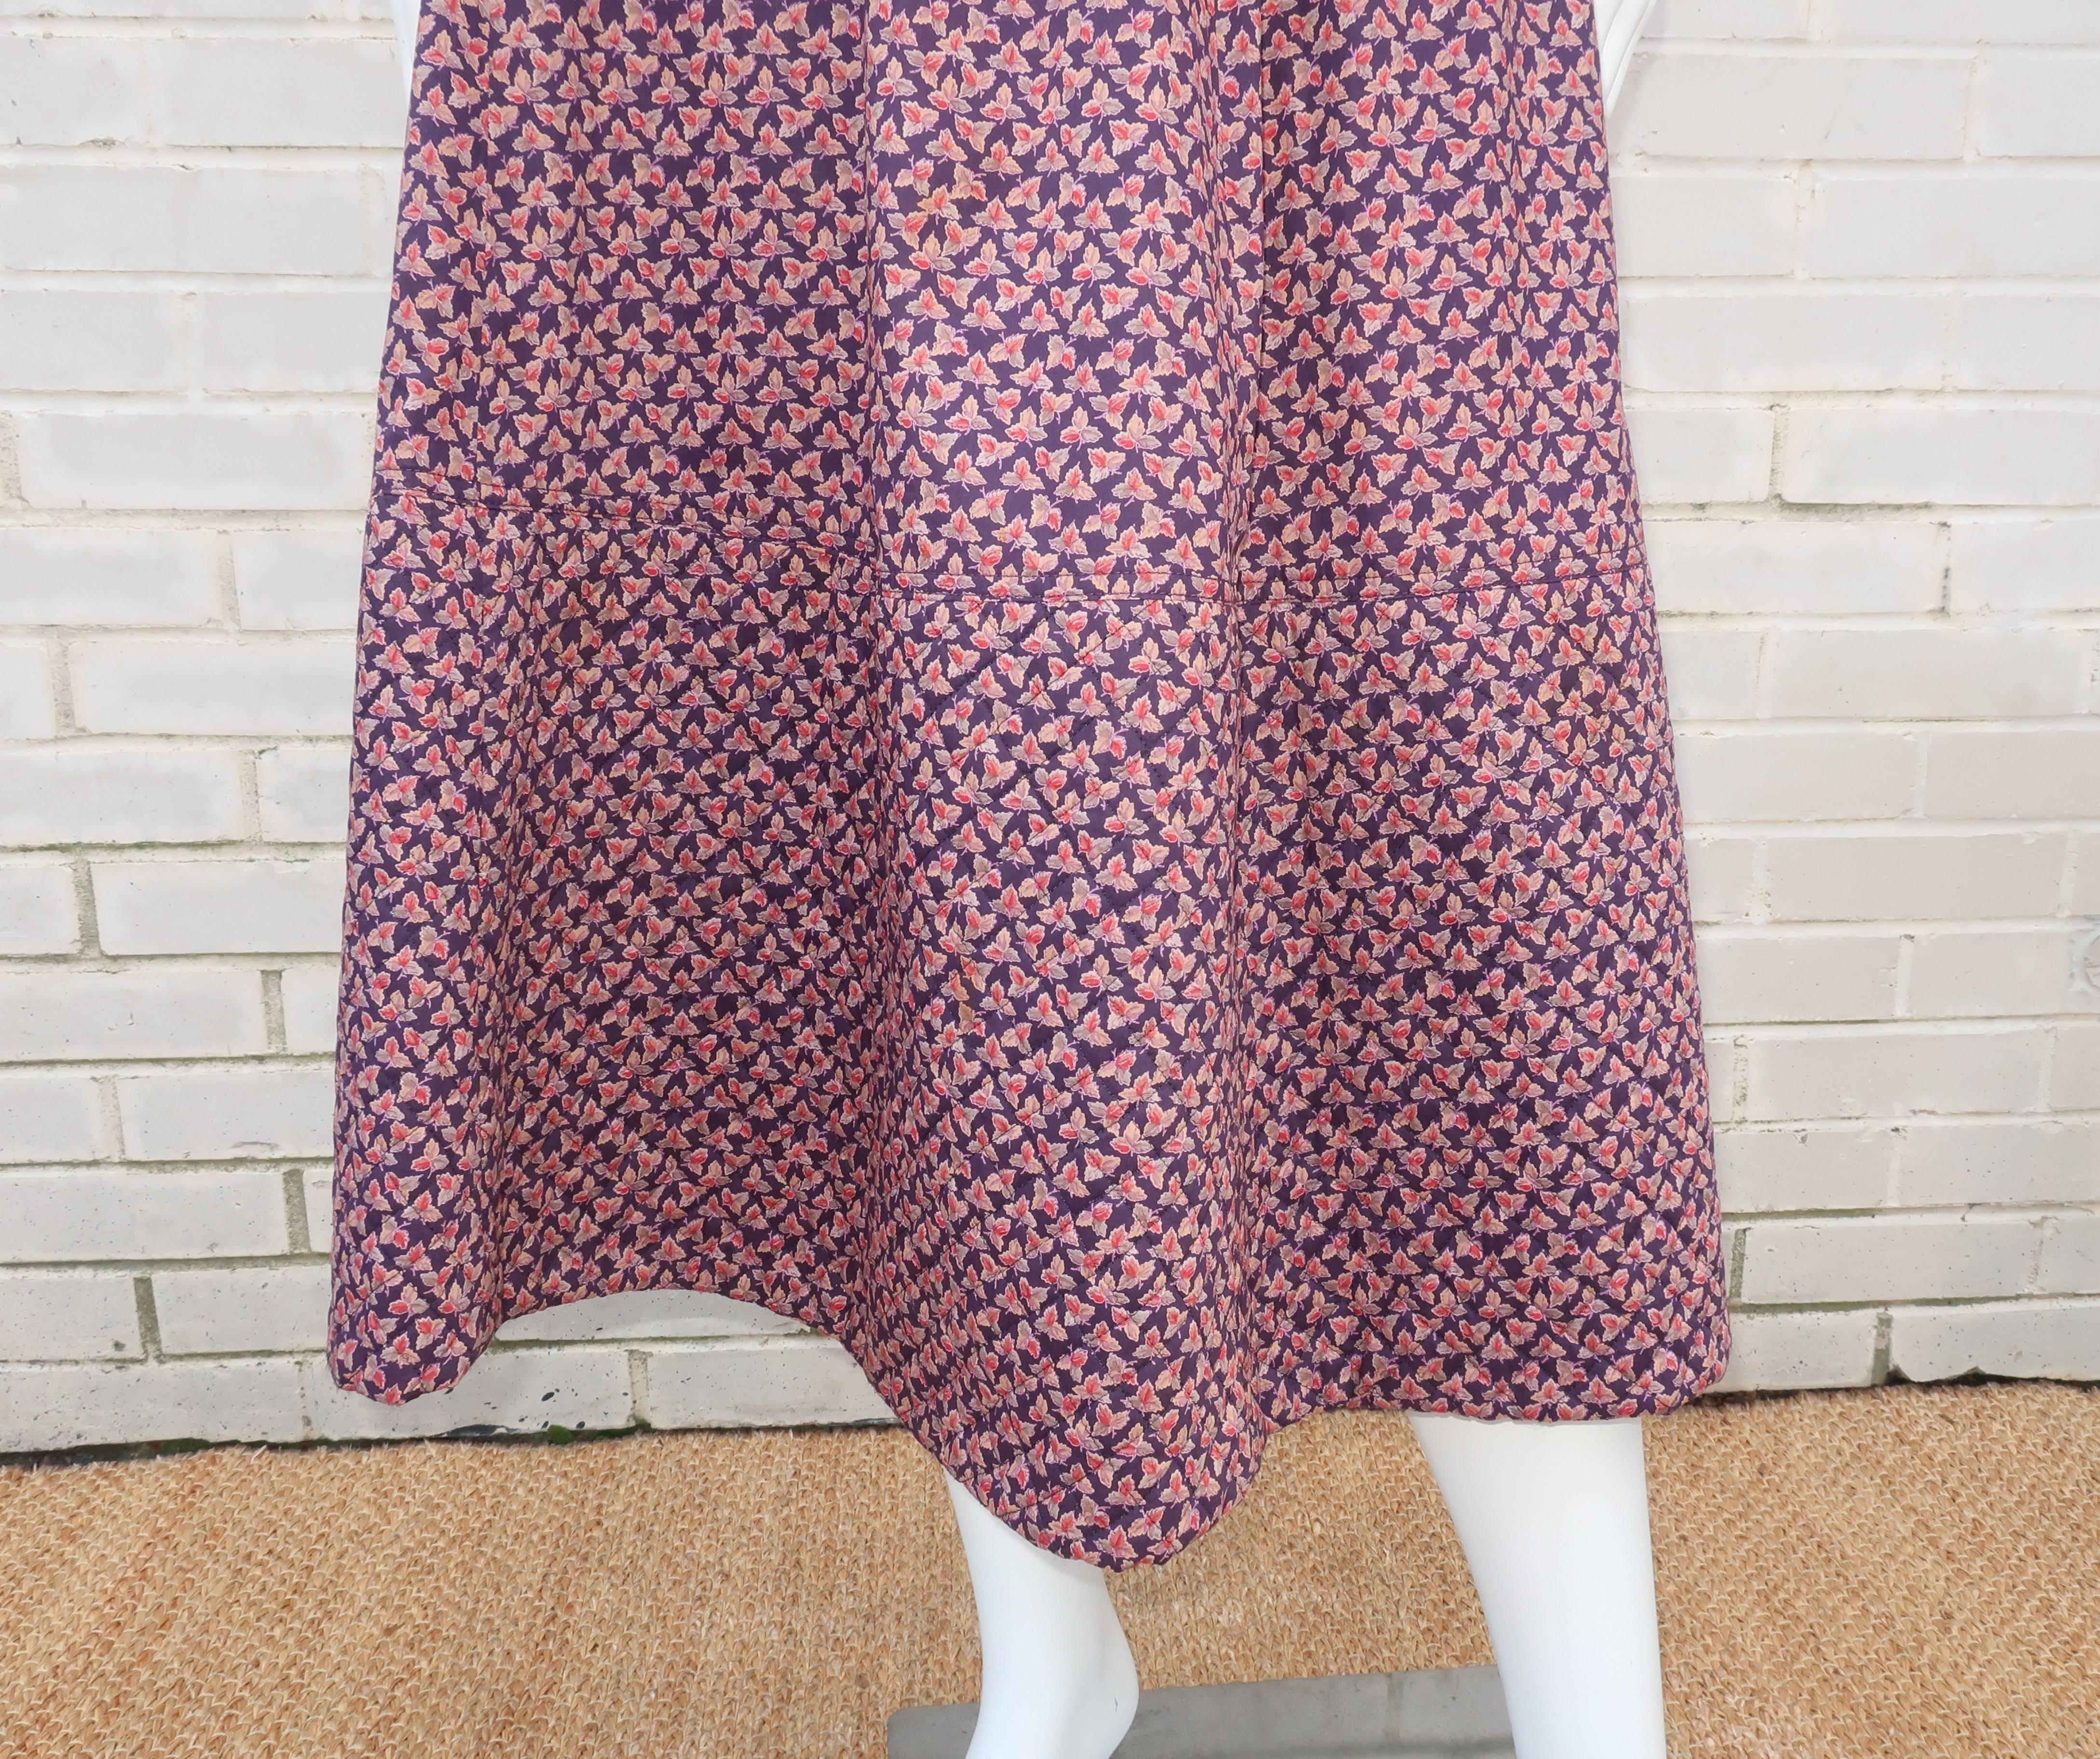 Jaeger has been making classic clothing since the turn of the 20th century.  This 1970's period perfect peasant skirt is fabricated from a lightweight cotton leaf print in shades of deep plum, mauve and a pinkish red.  It buttons and zips at the